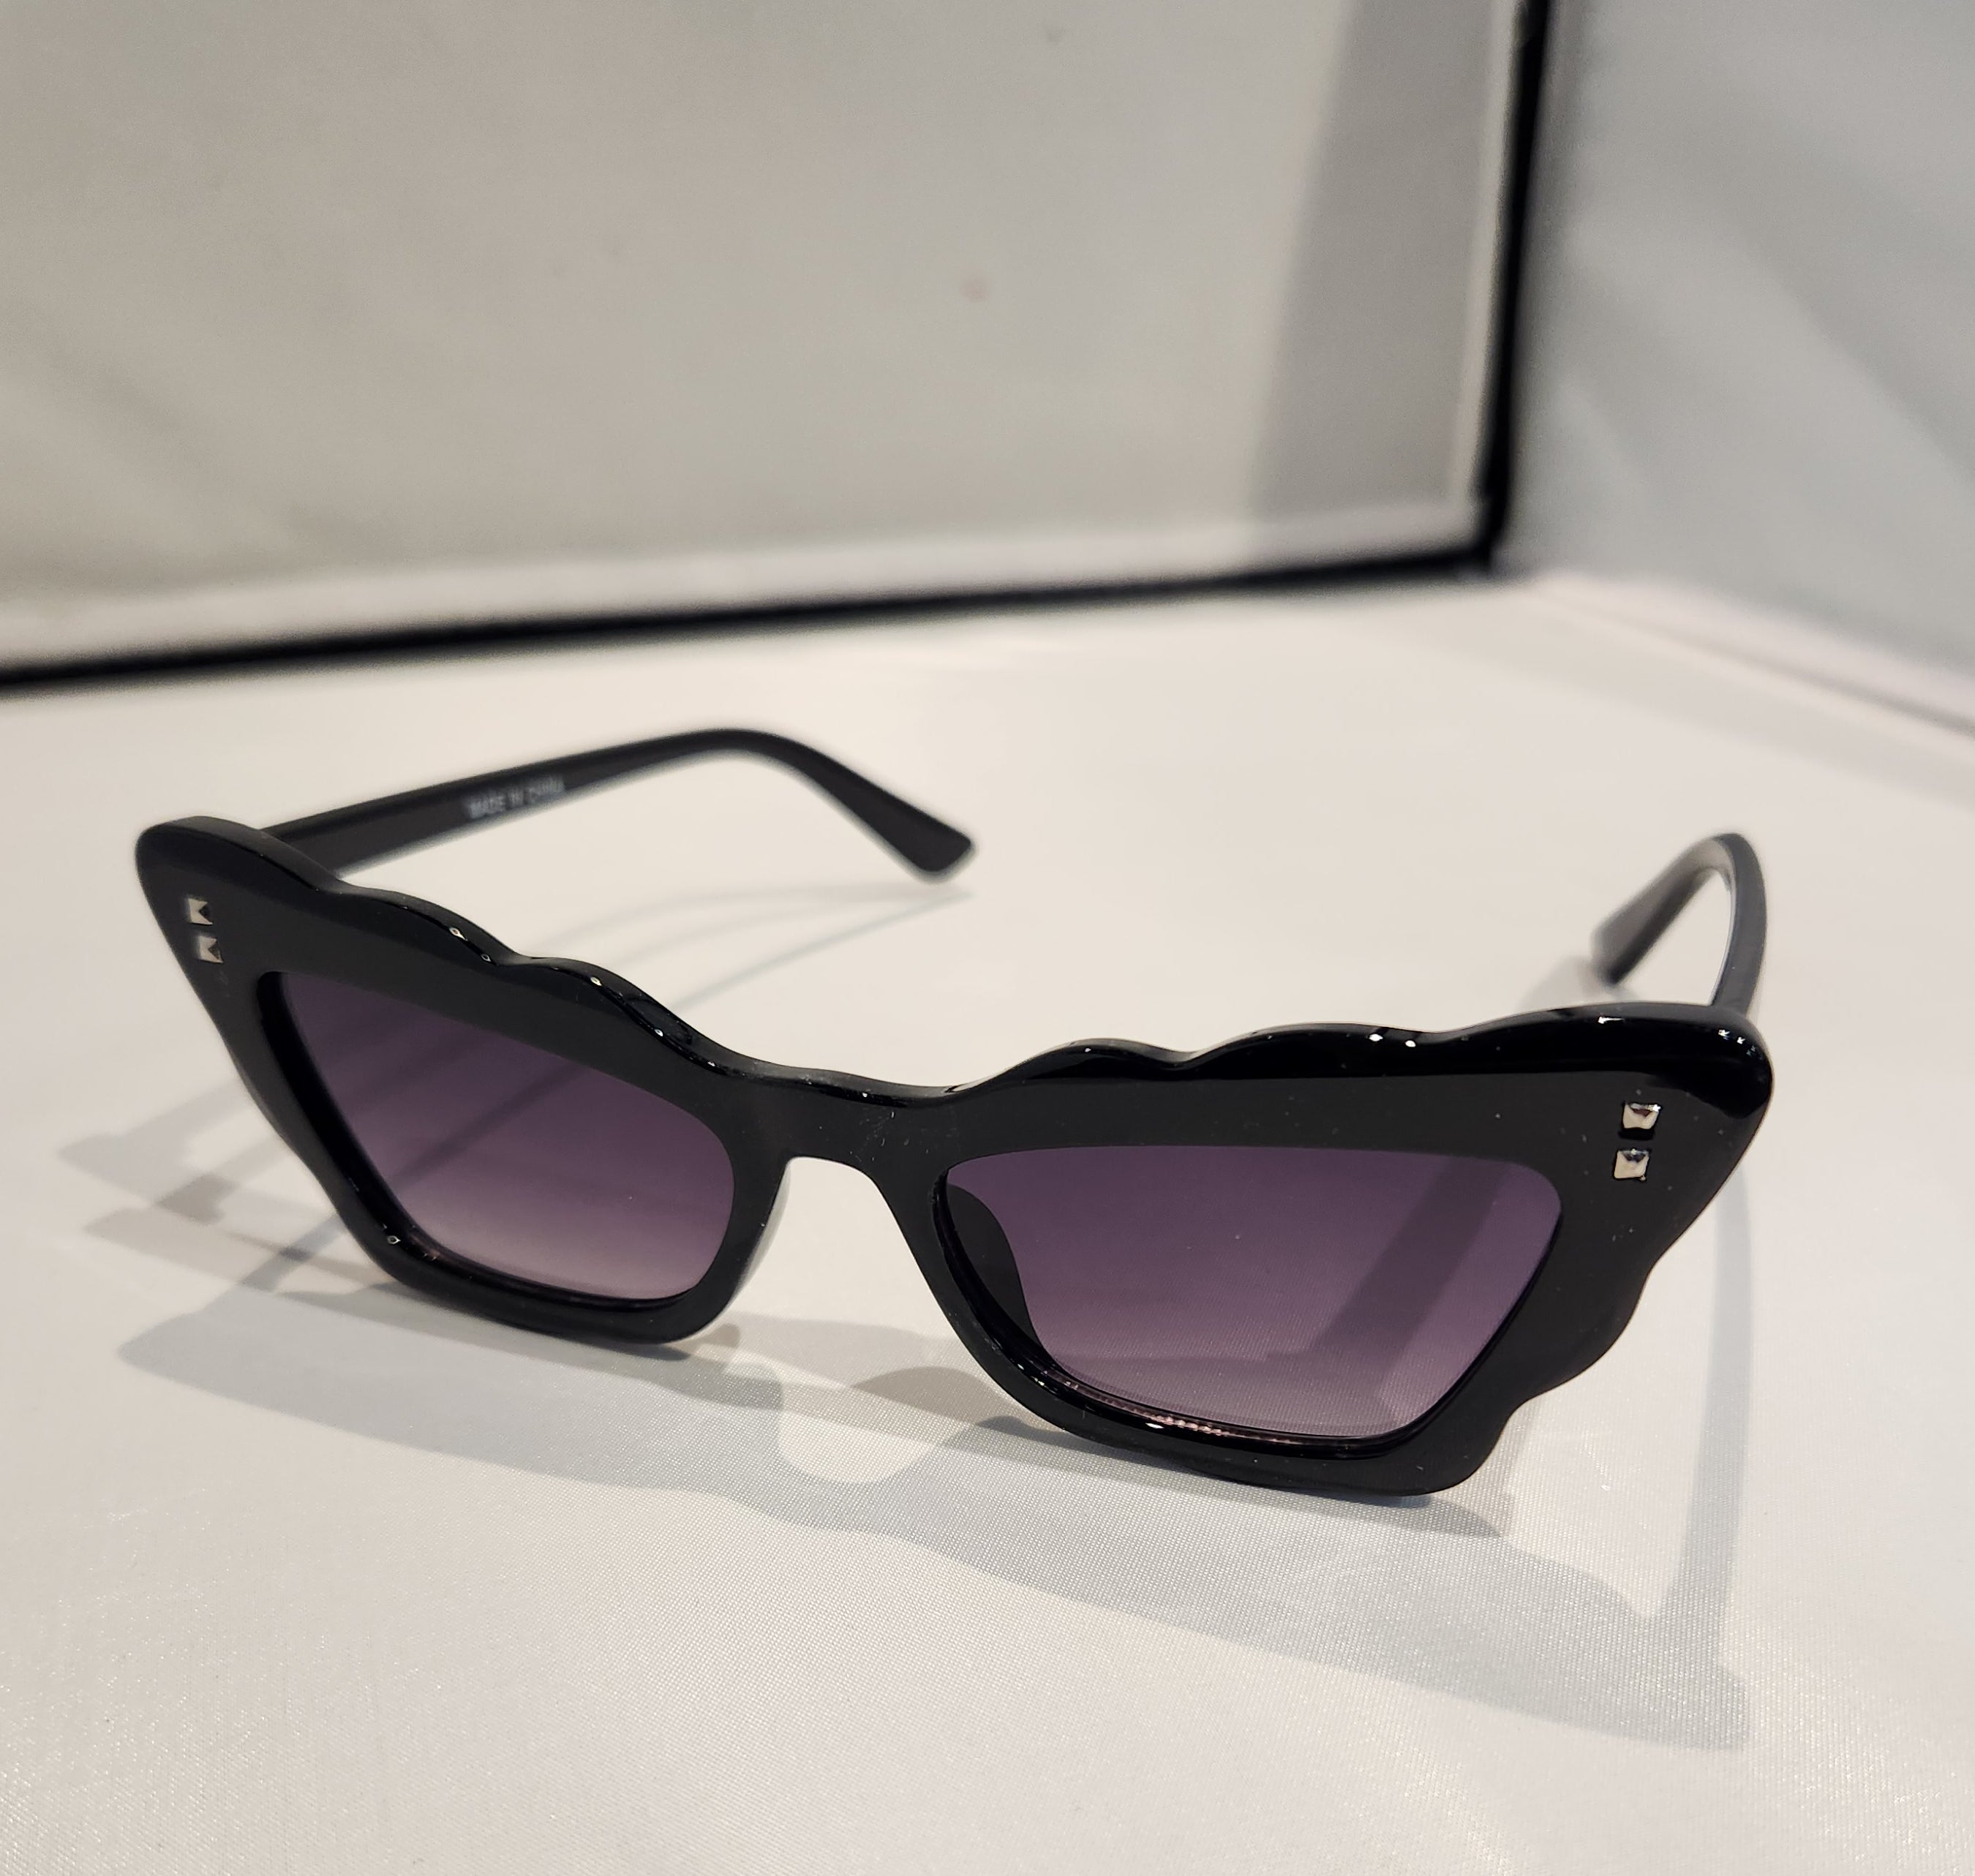 Cat Shape with Wave on Frame Sunglasses